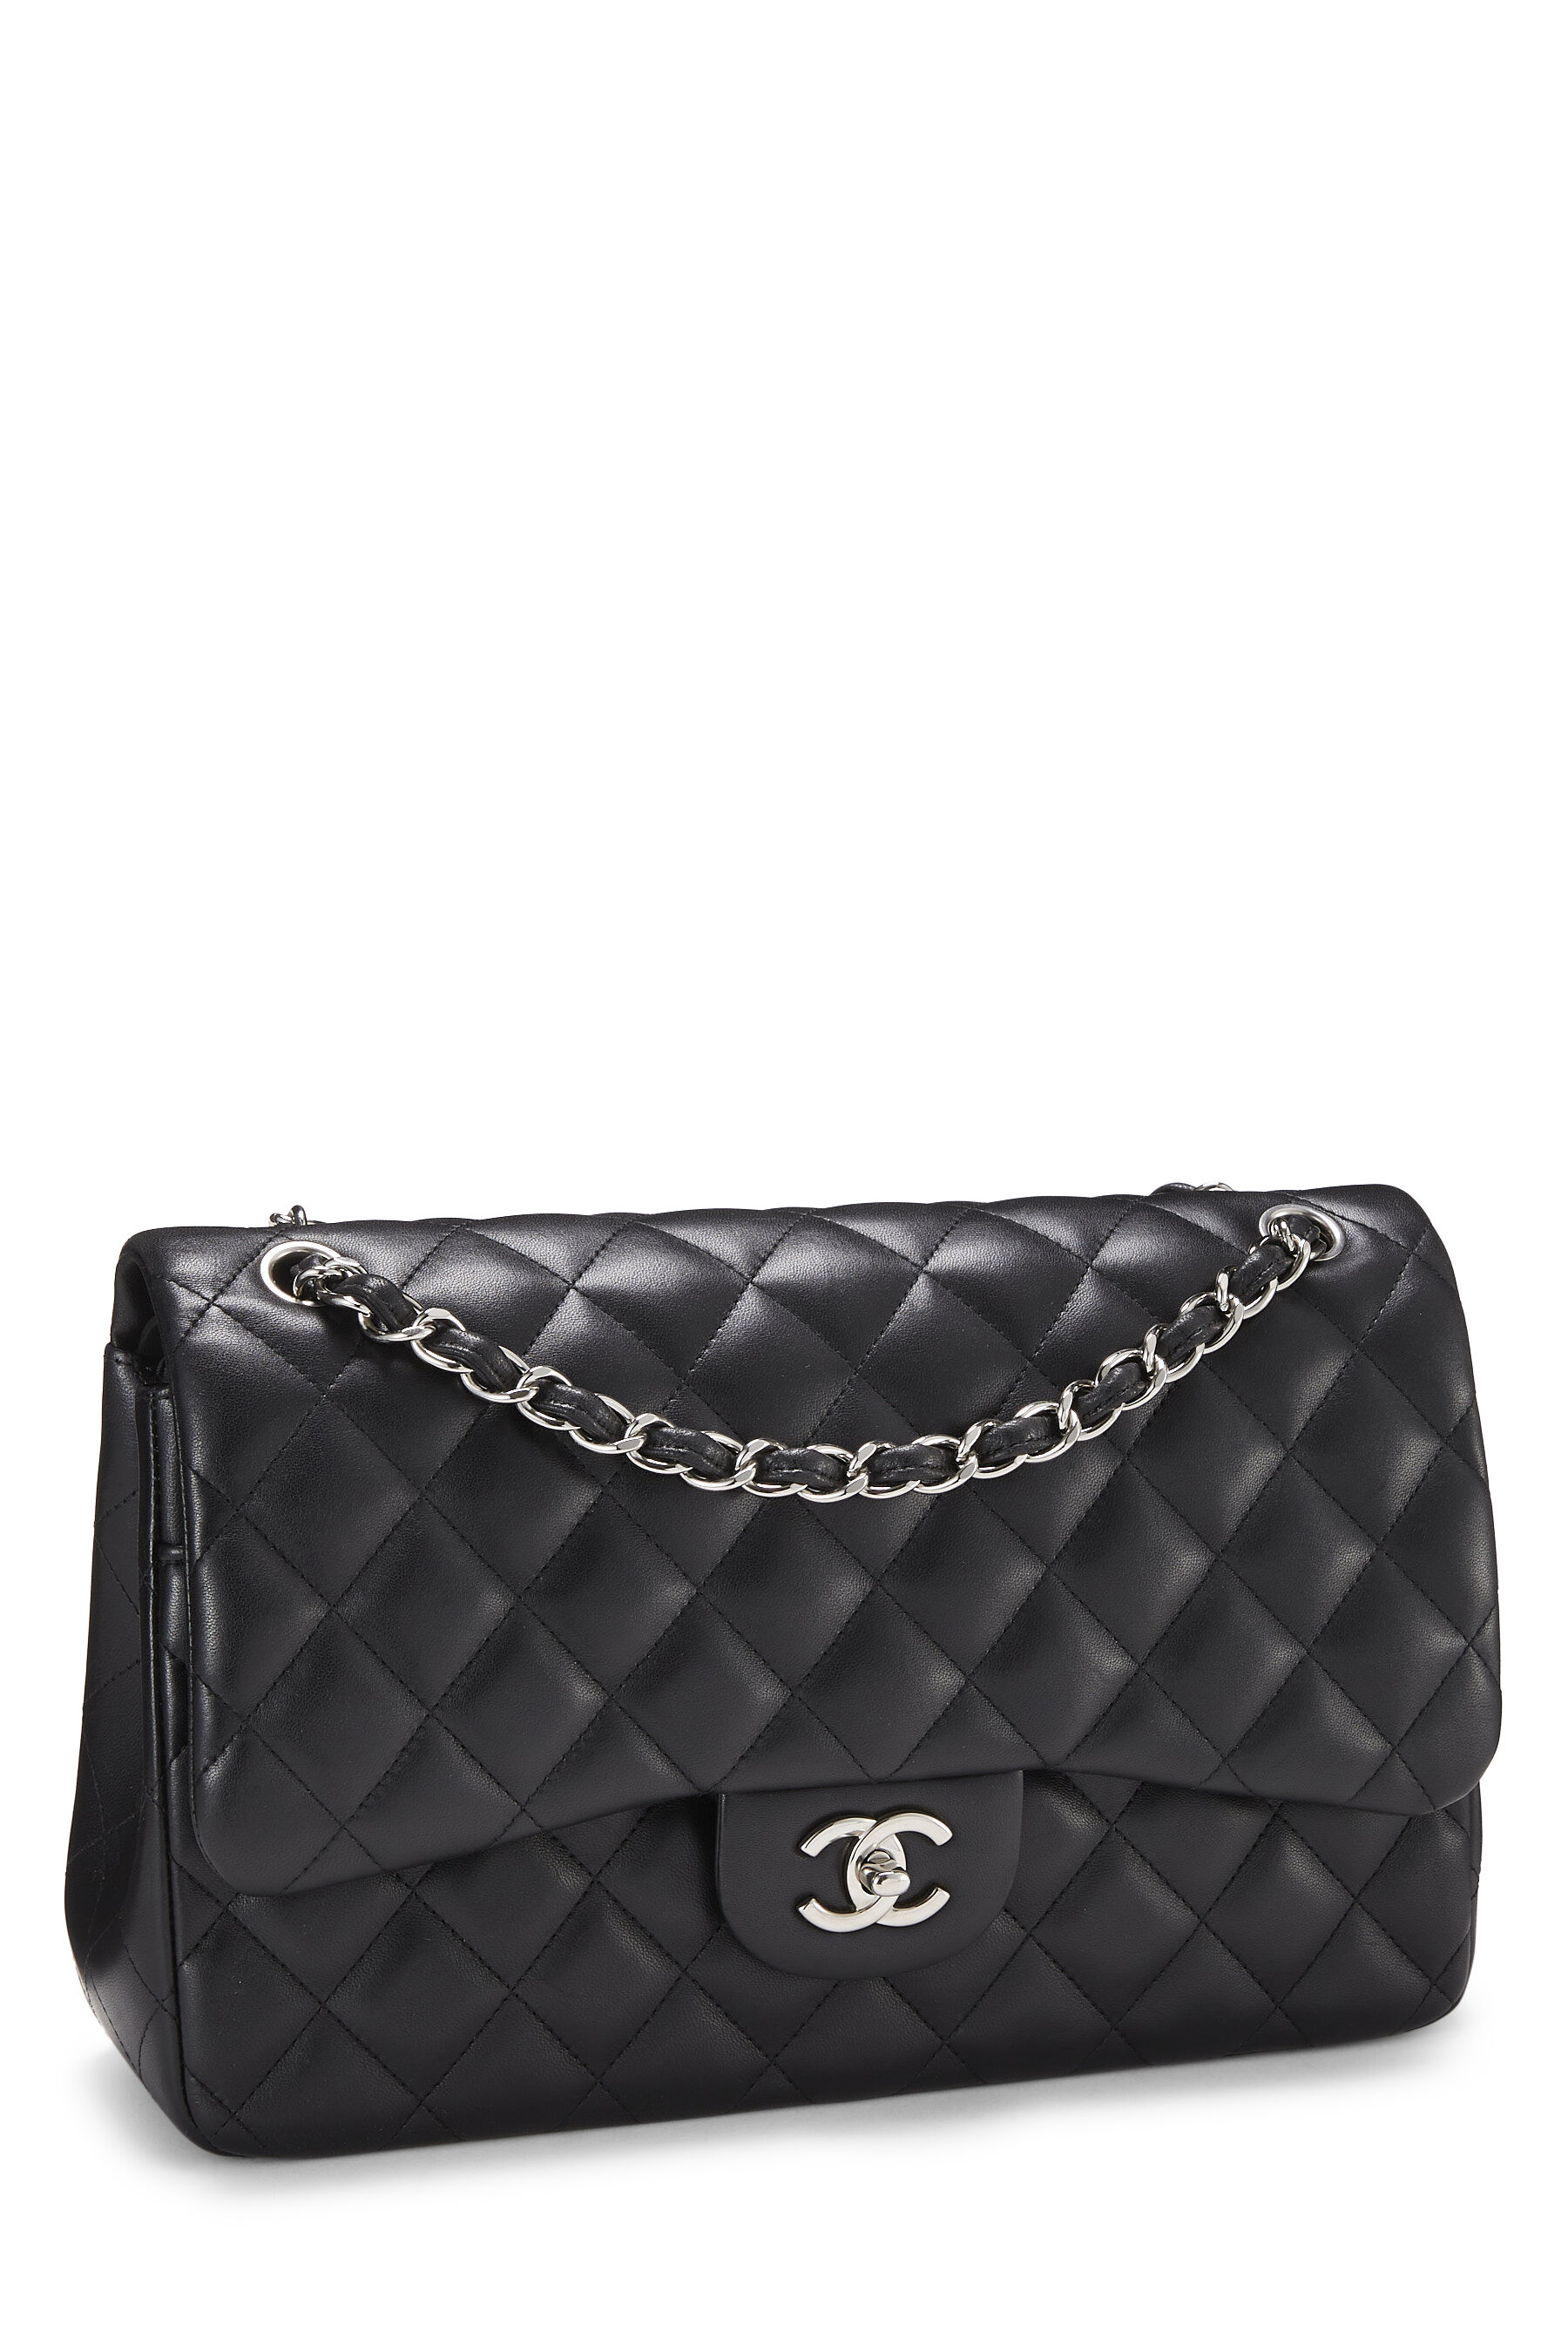 Chanel - Black Quilted Lambskin New Classic Double Flap Jumbo